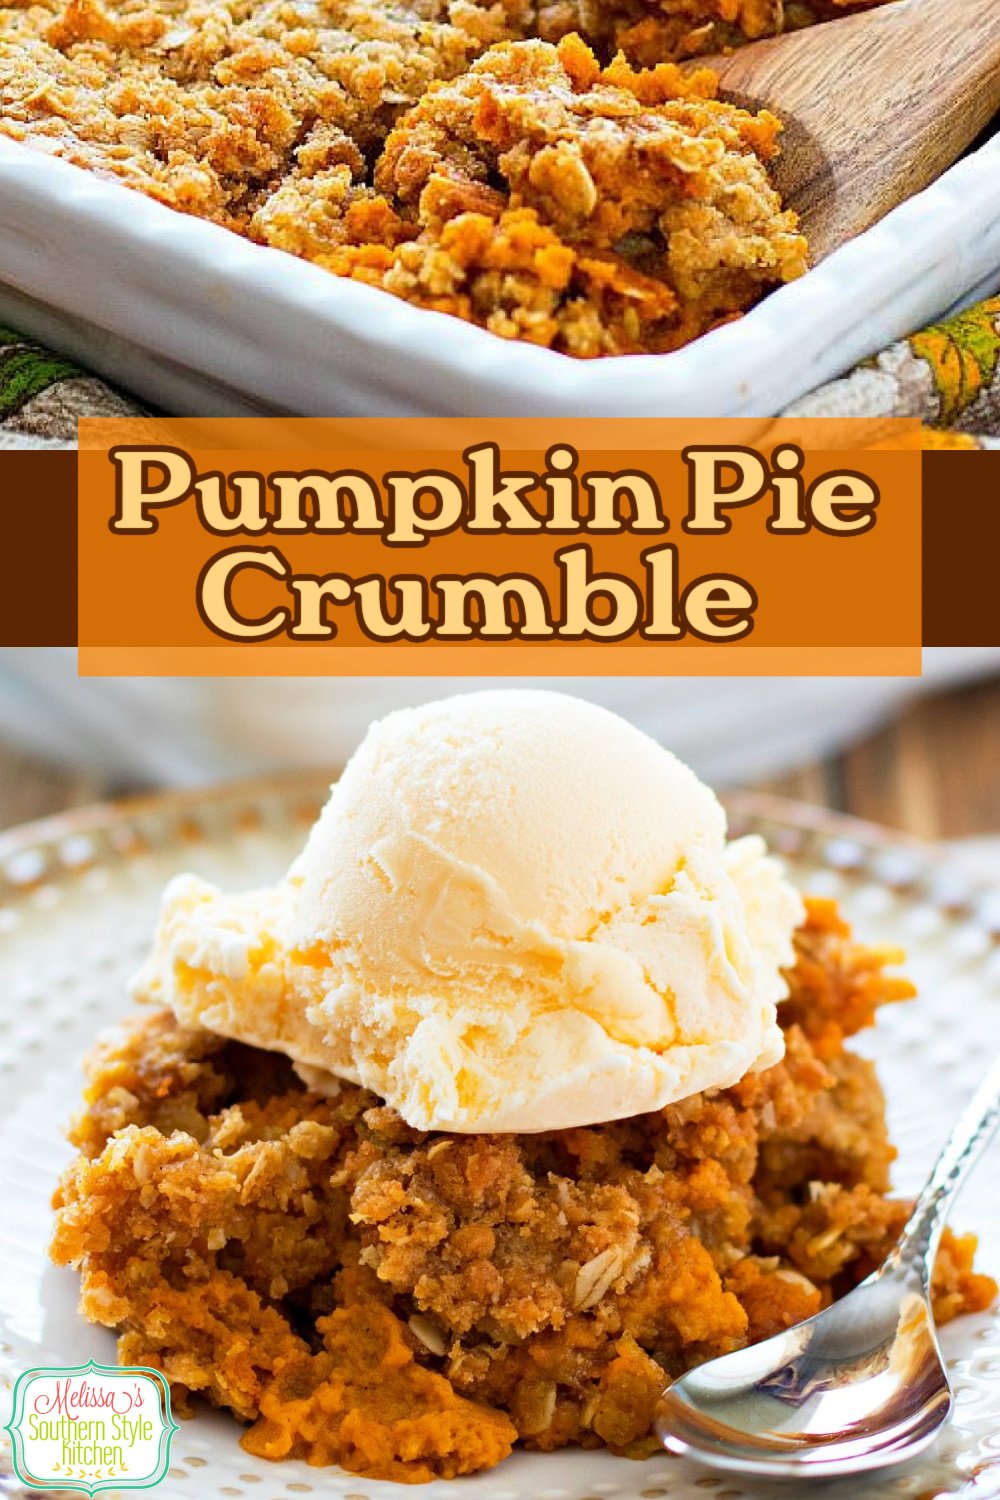 This Pumpkin Pie Crumble combines the best of two classic fall desserts #pumpkinpie #pumpkinpiecrumble #pumpkincrips #pumpkinpierecipes #bestpumpkindesserts #fallbaking #pumpkindesserts #desserts #dessertfoodrecipes #thankgivingdesserts #southernfood #southernrecipes